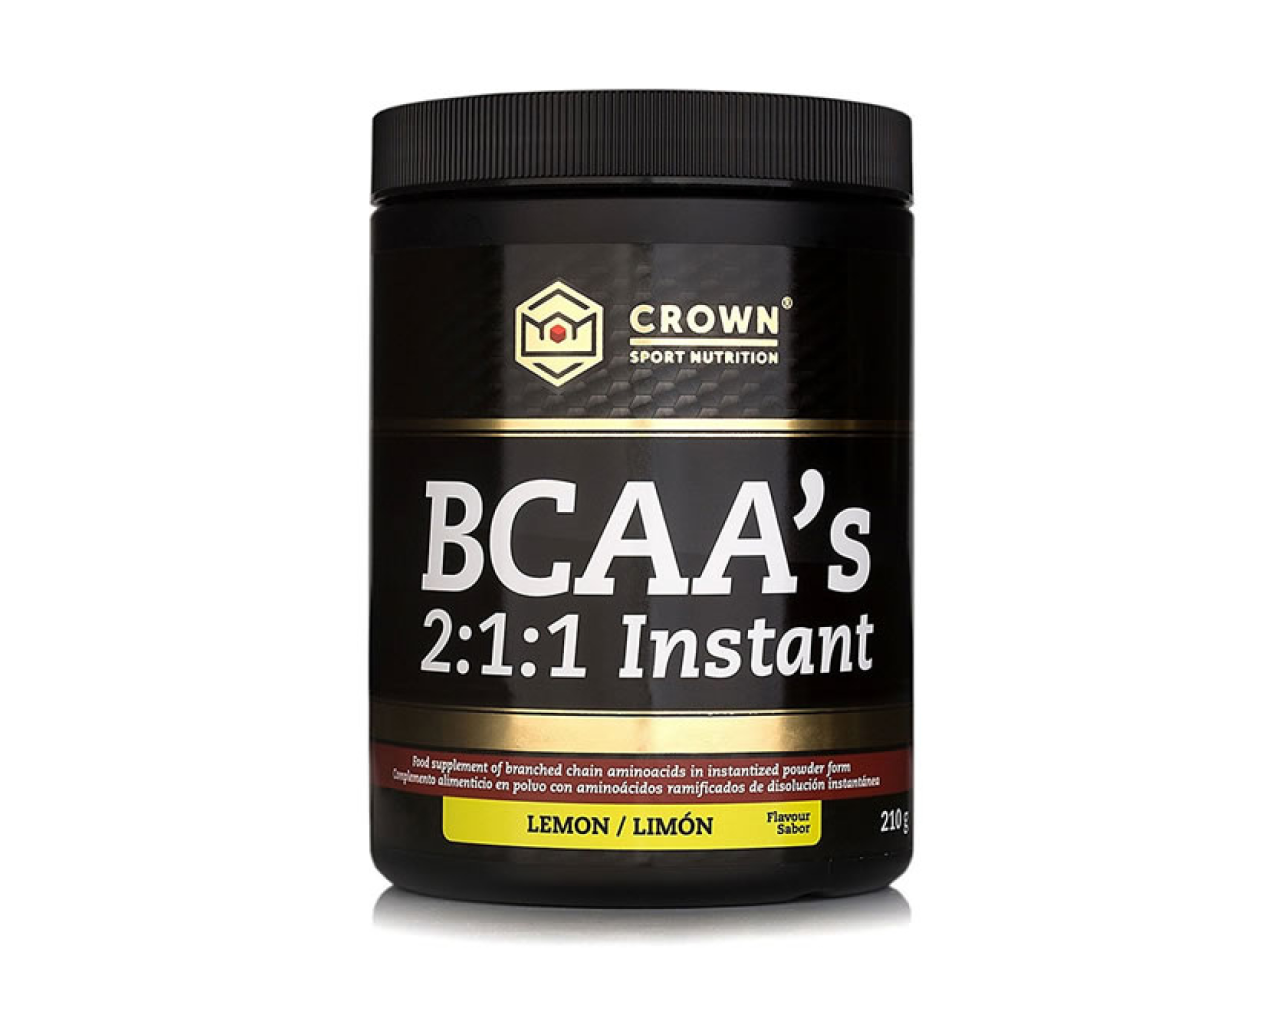 BCAA"S Bar Crown Instant